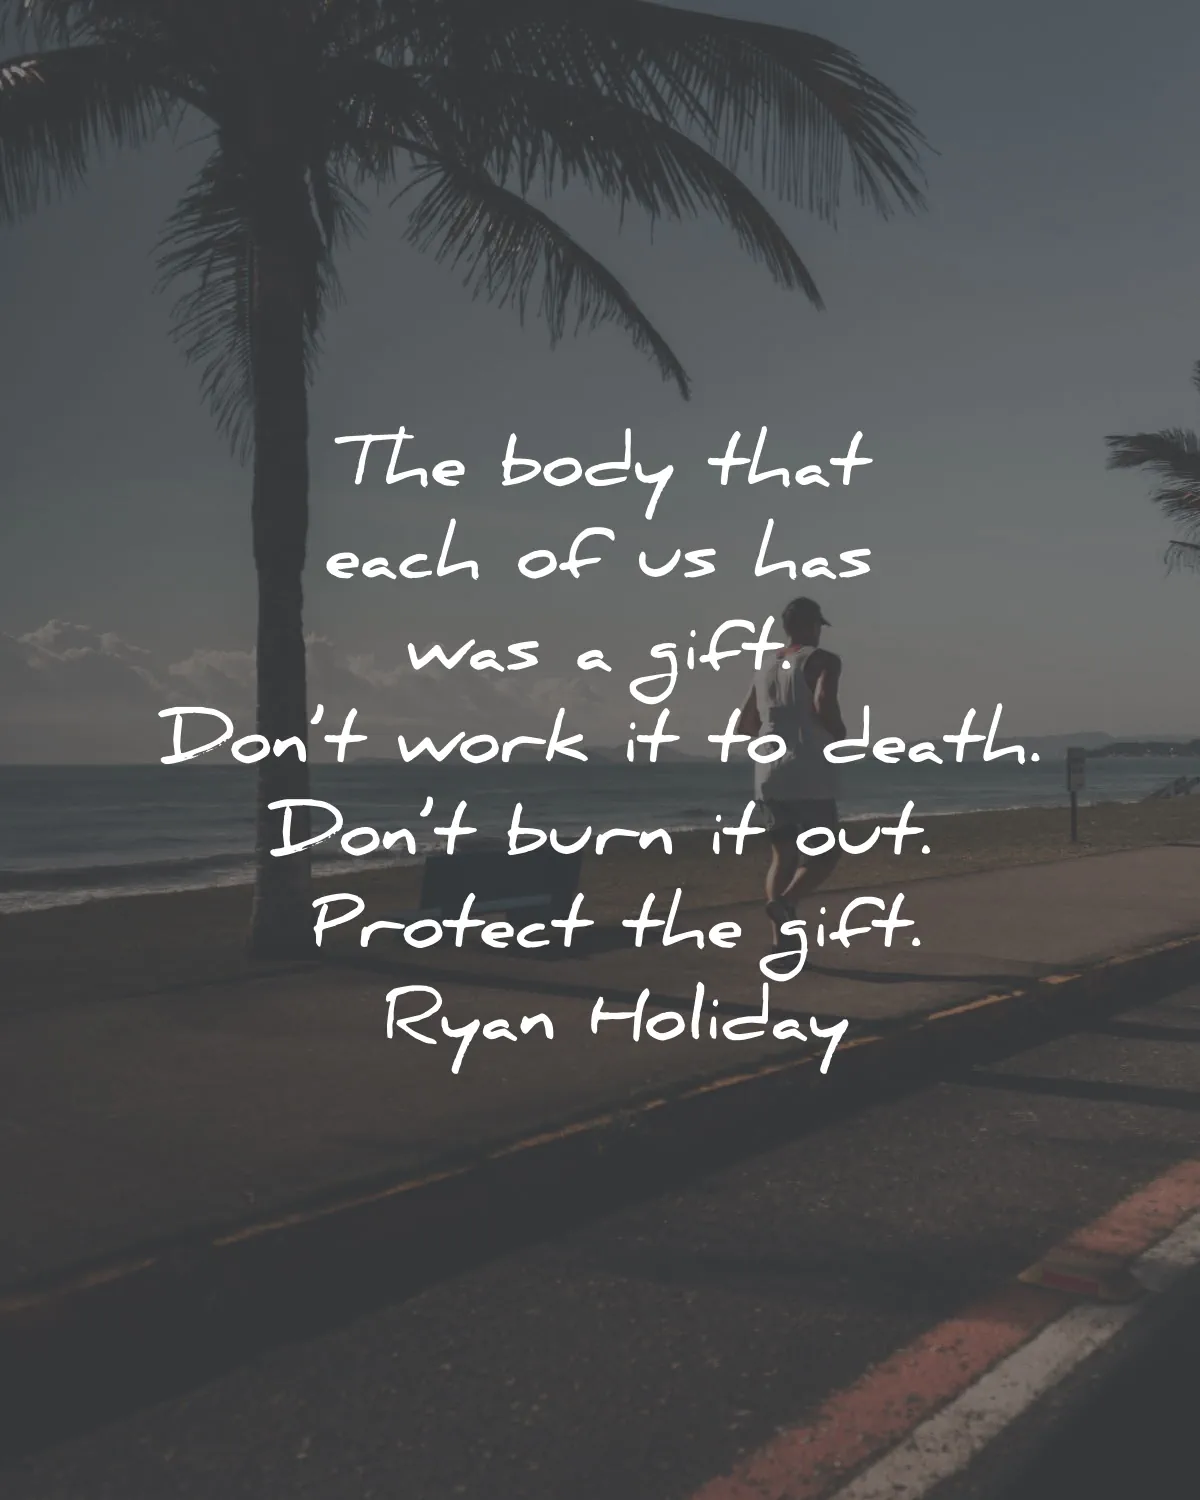 stillness is the key quotes summary ryan holiday body gift work death burn protect wisdom